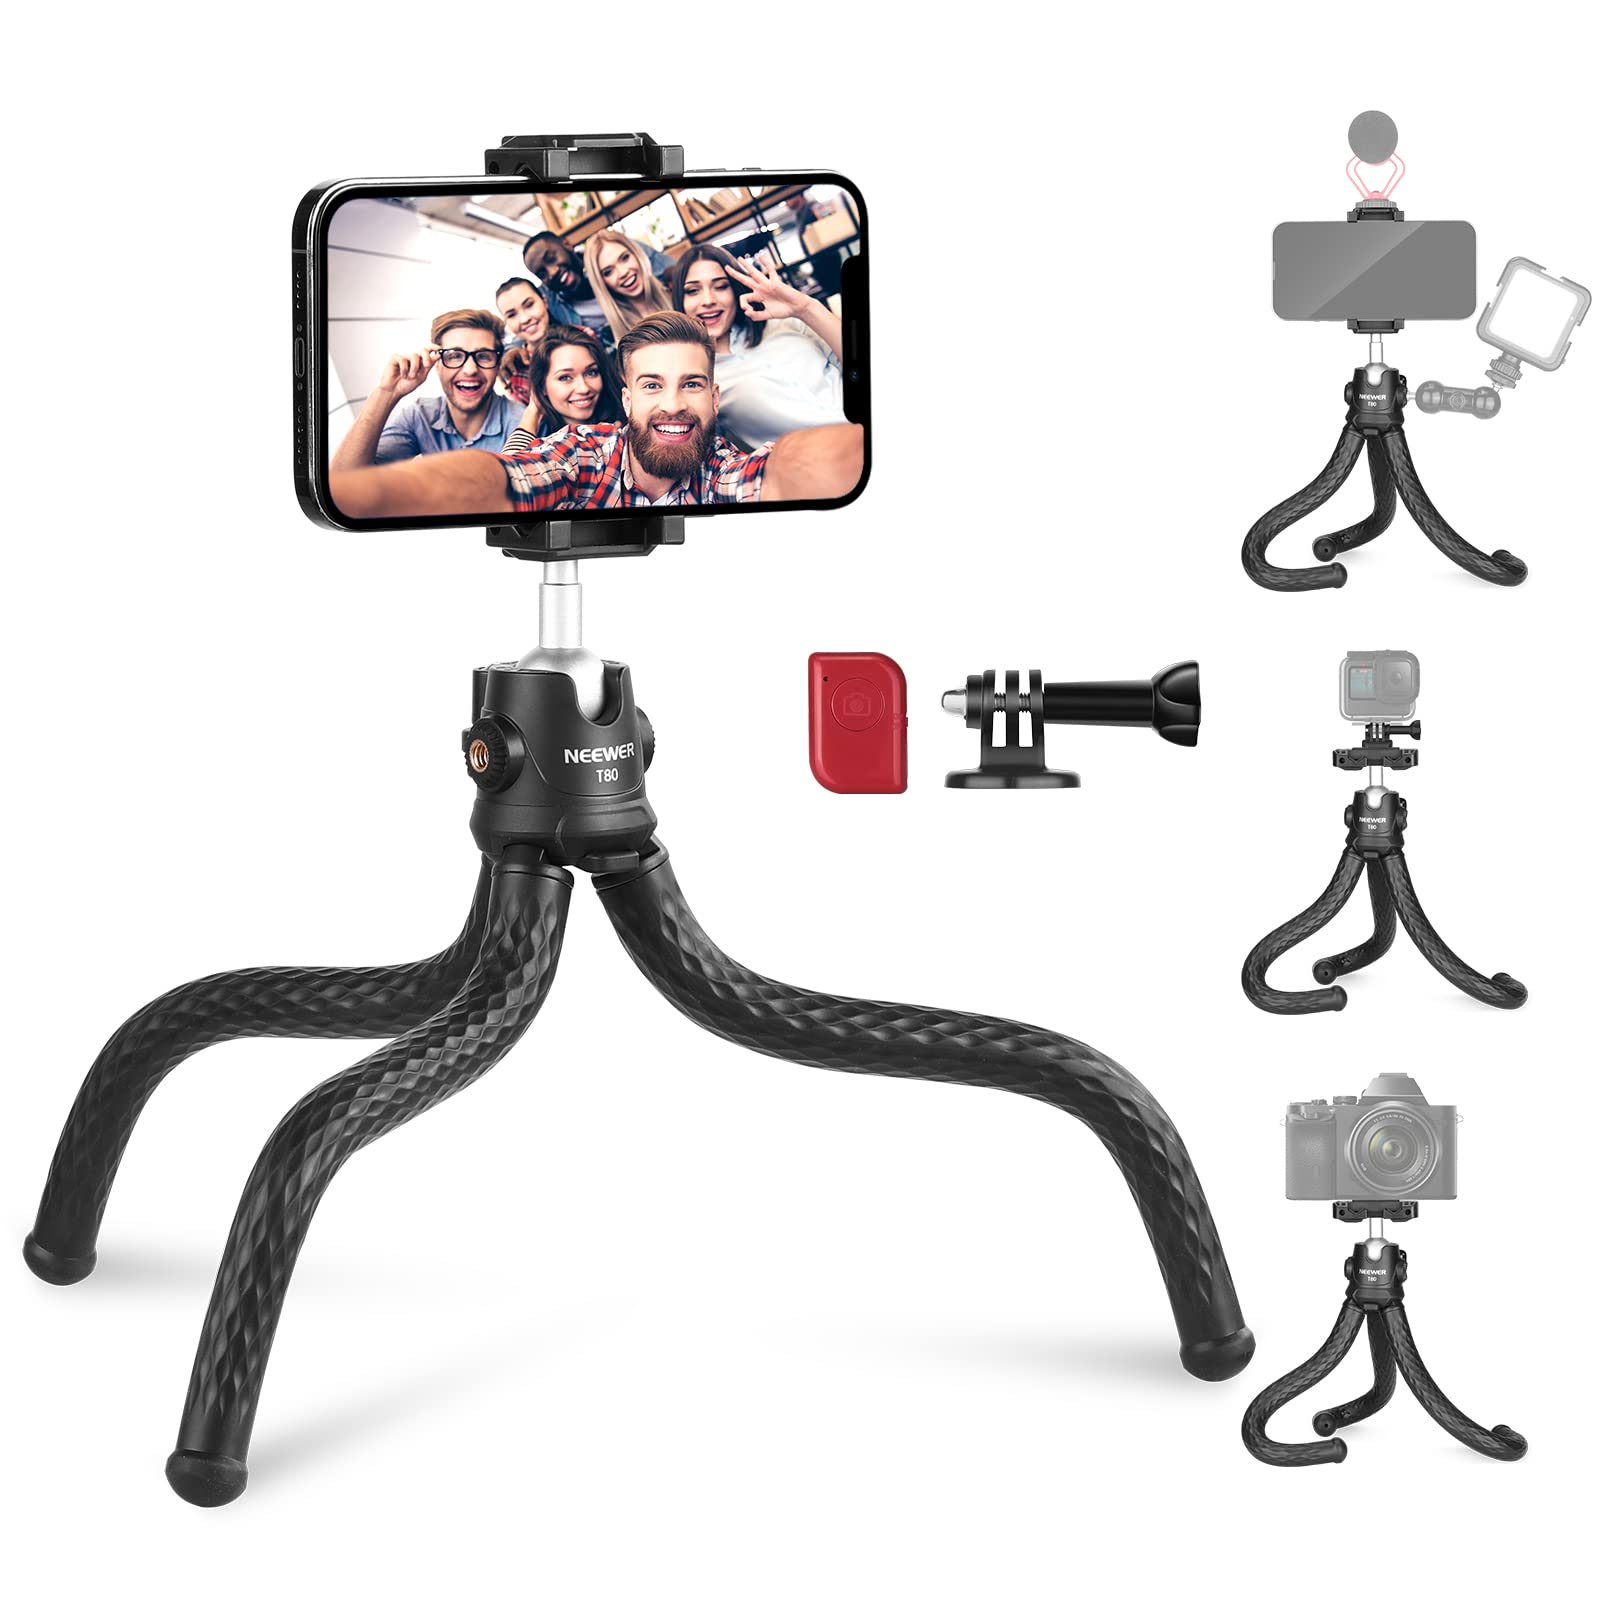 Neewer LED Video Conference Light Kit with Clip & Phone Holder for